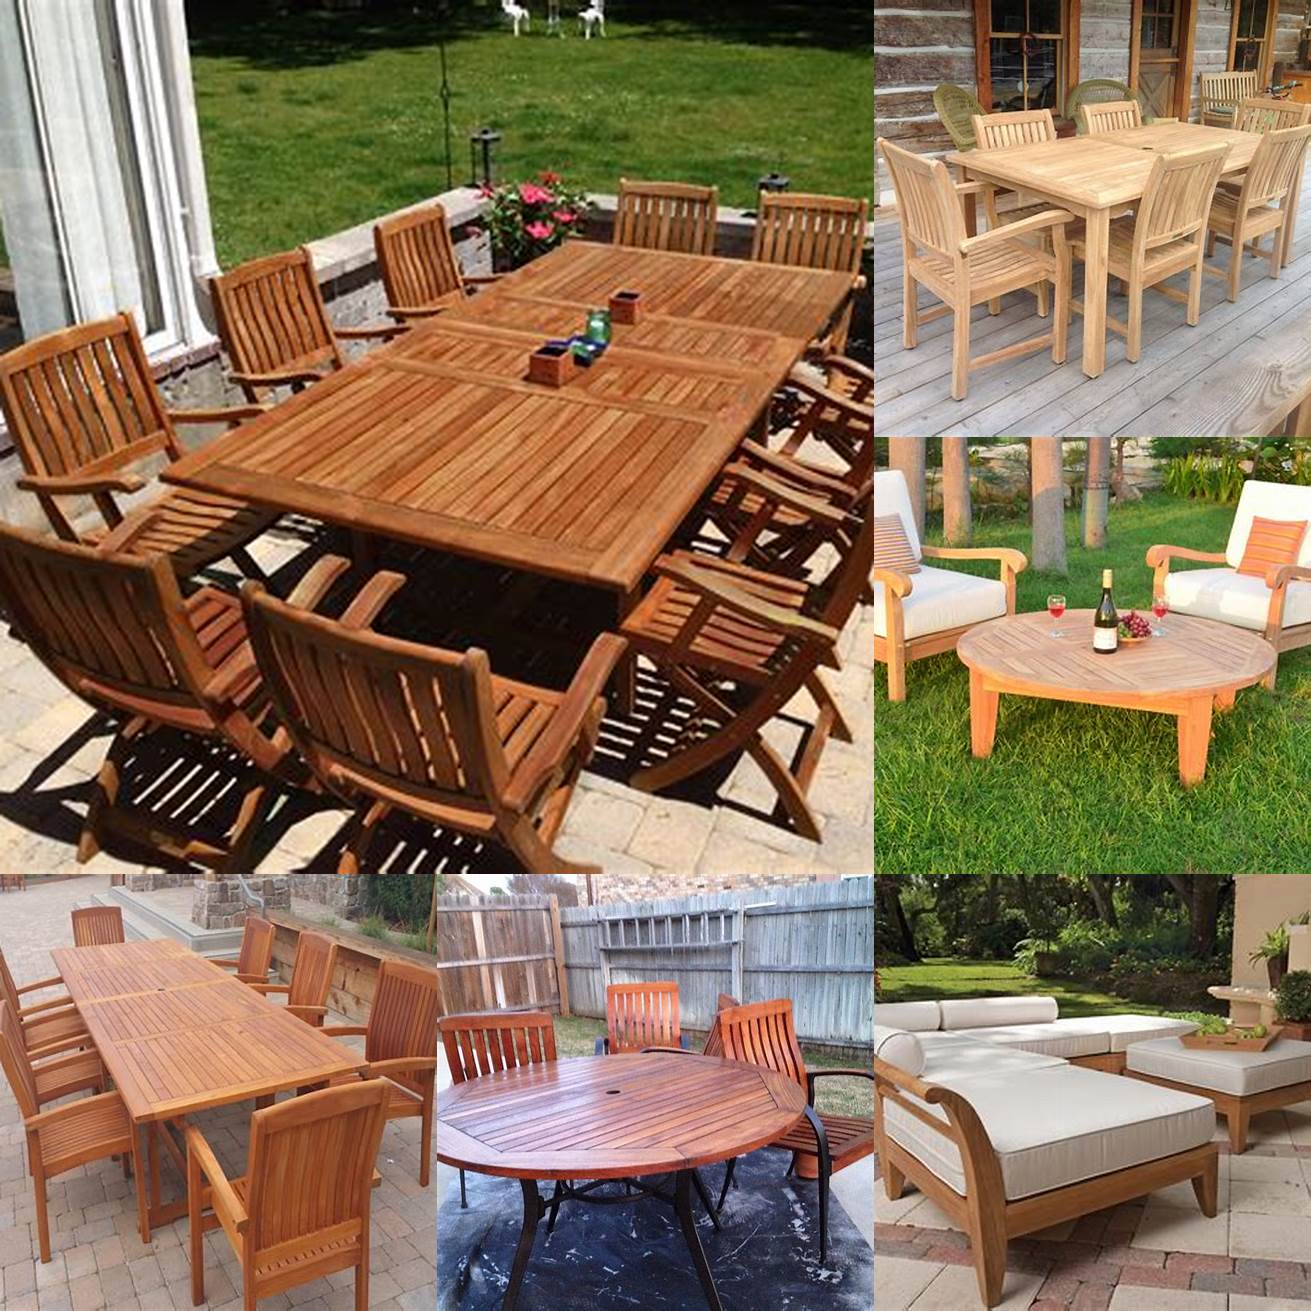 A Picture of Teak Furniture in Use